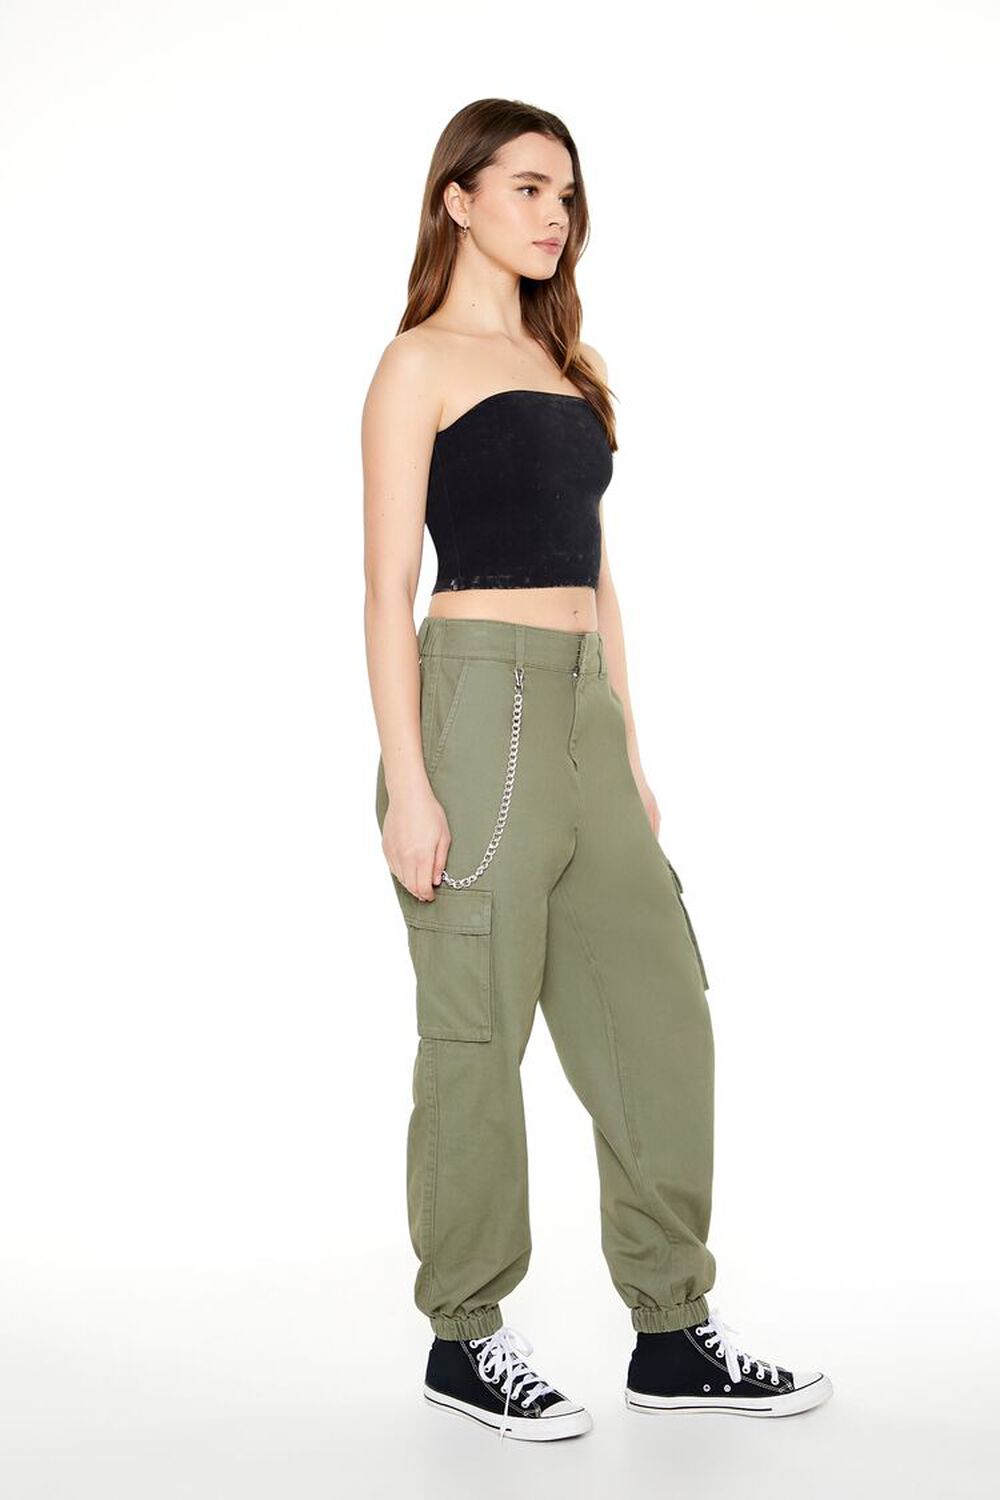 DEEP GREEN Wallet Chain Cargo Joggers, image 2